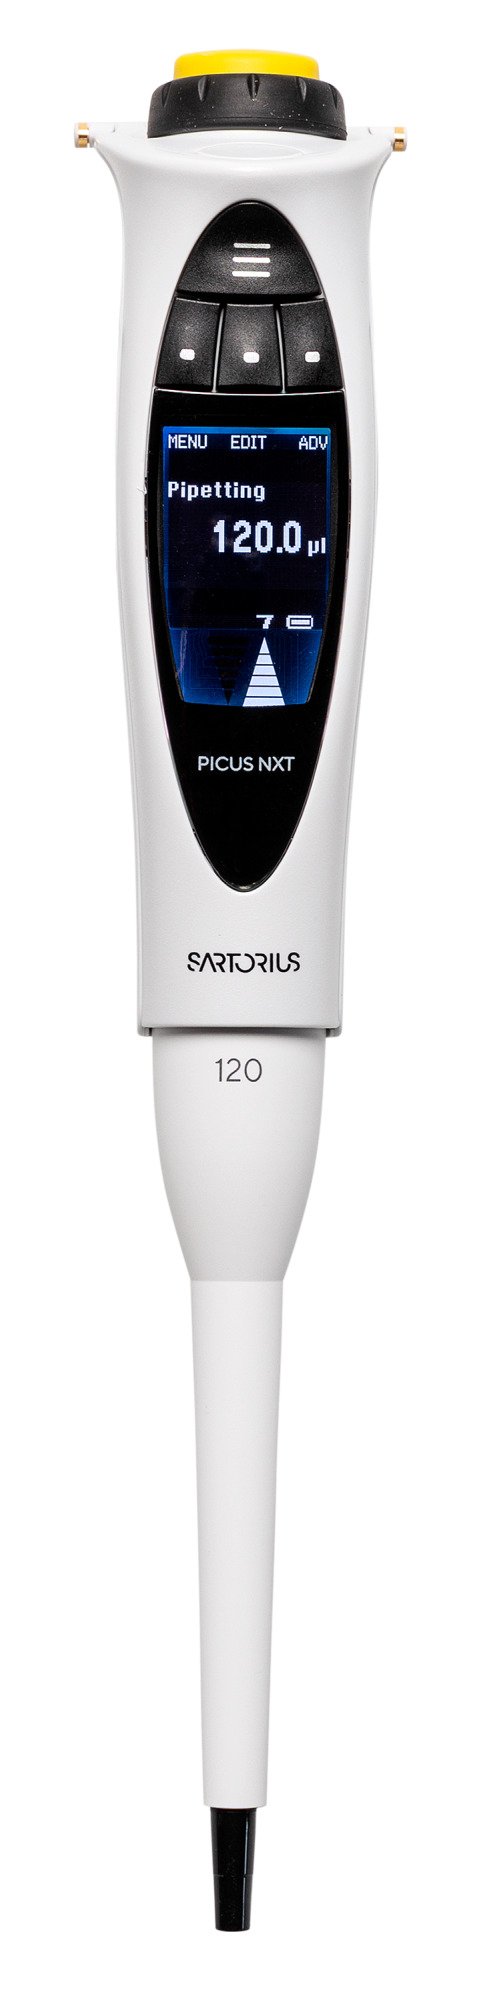 Picus NxT Electronic Pipette, 1-ch, 100-5000 ul